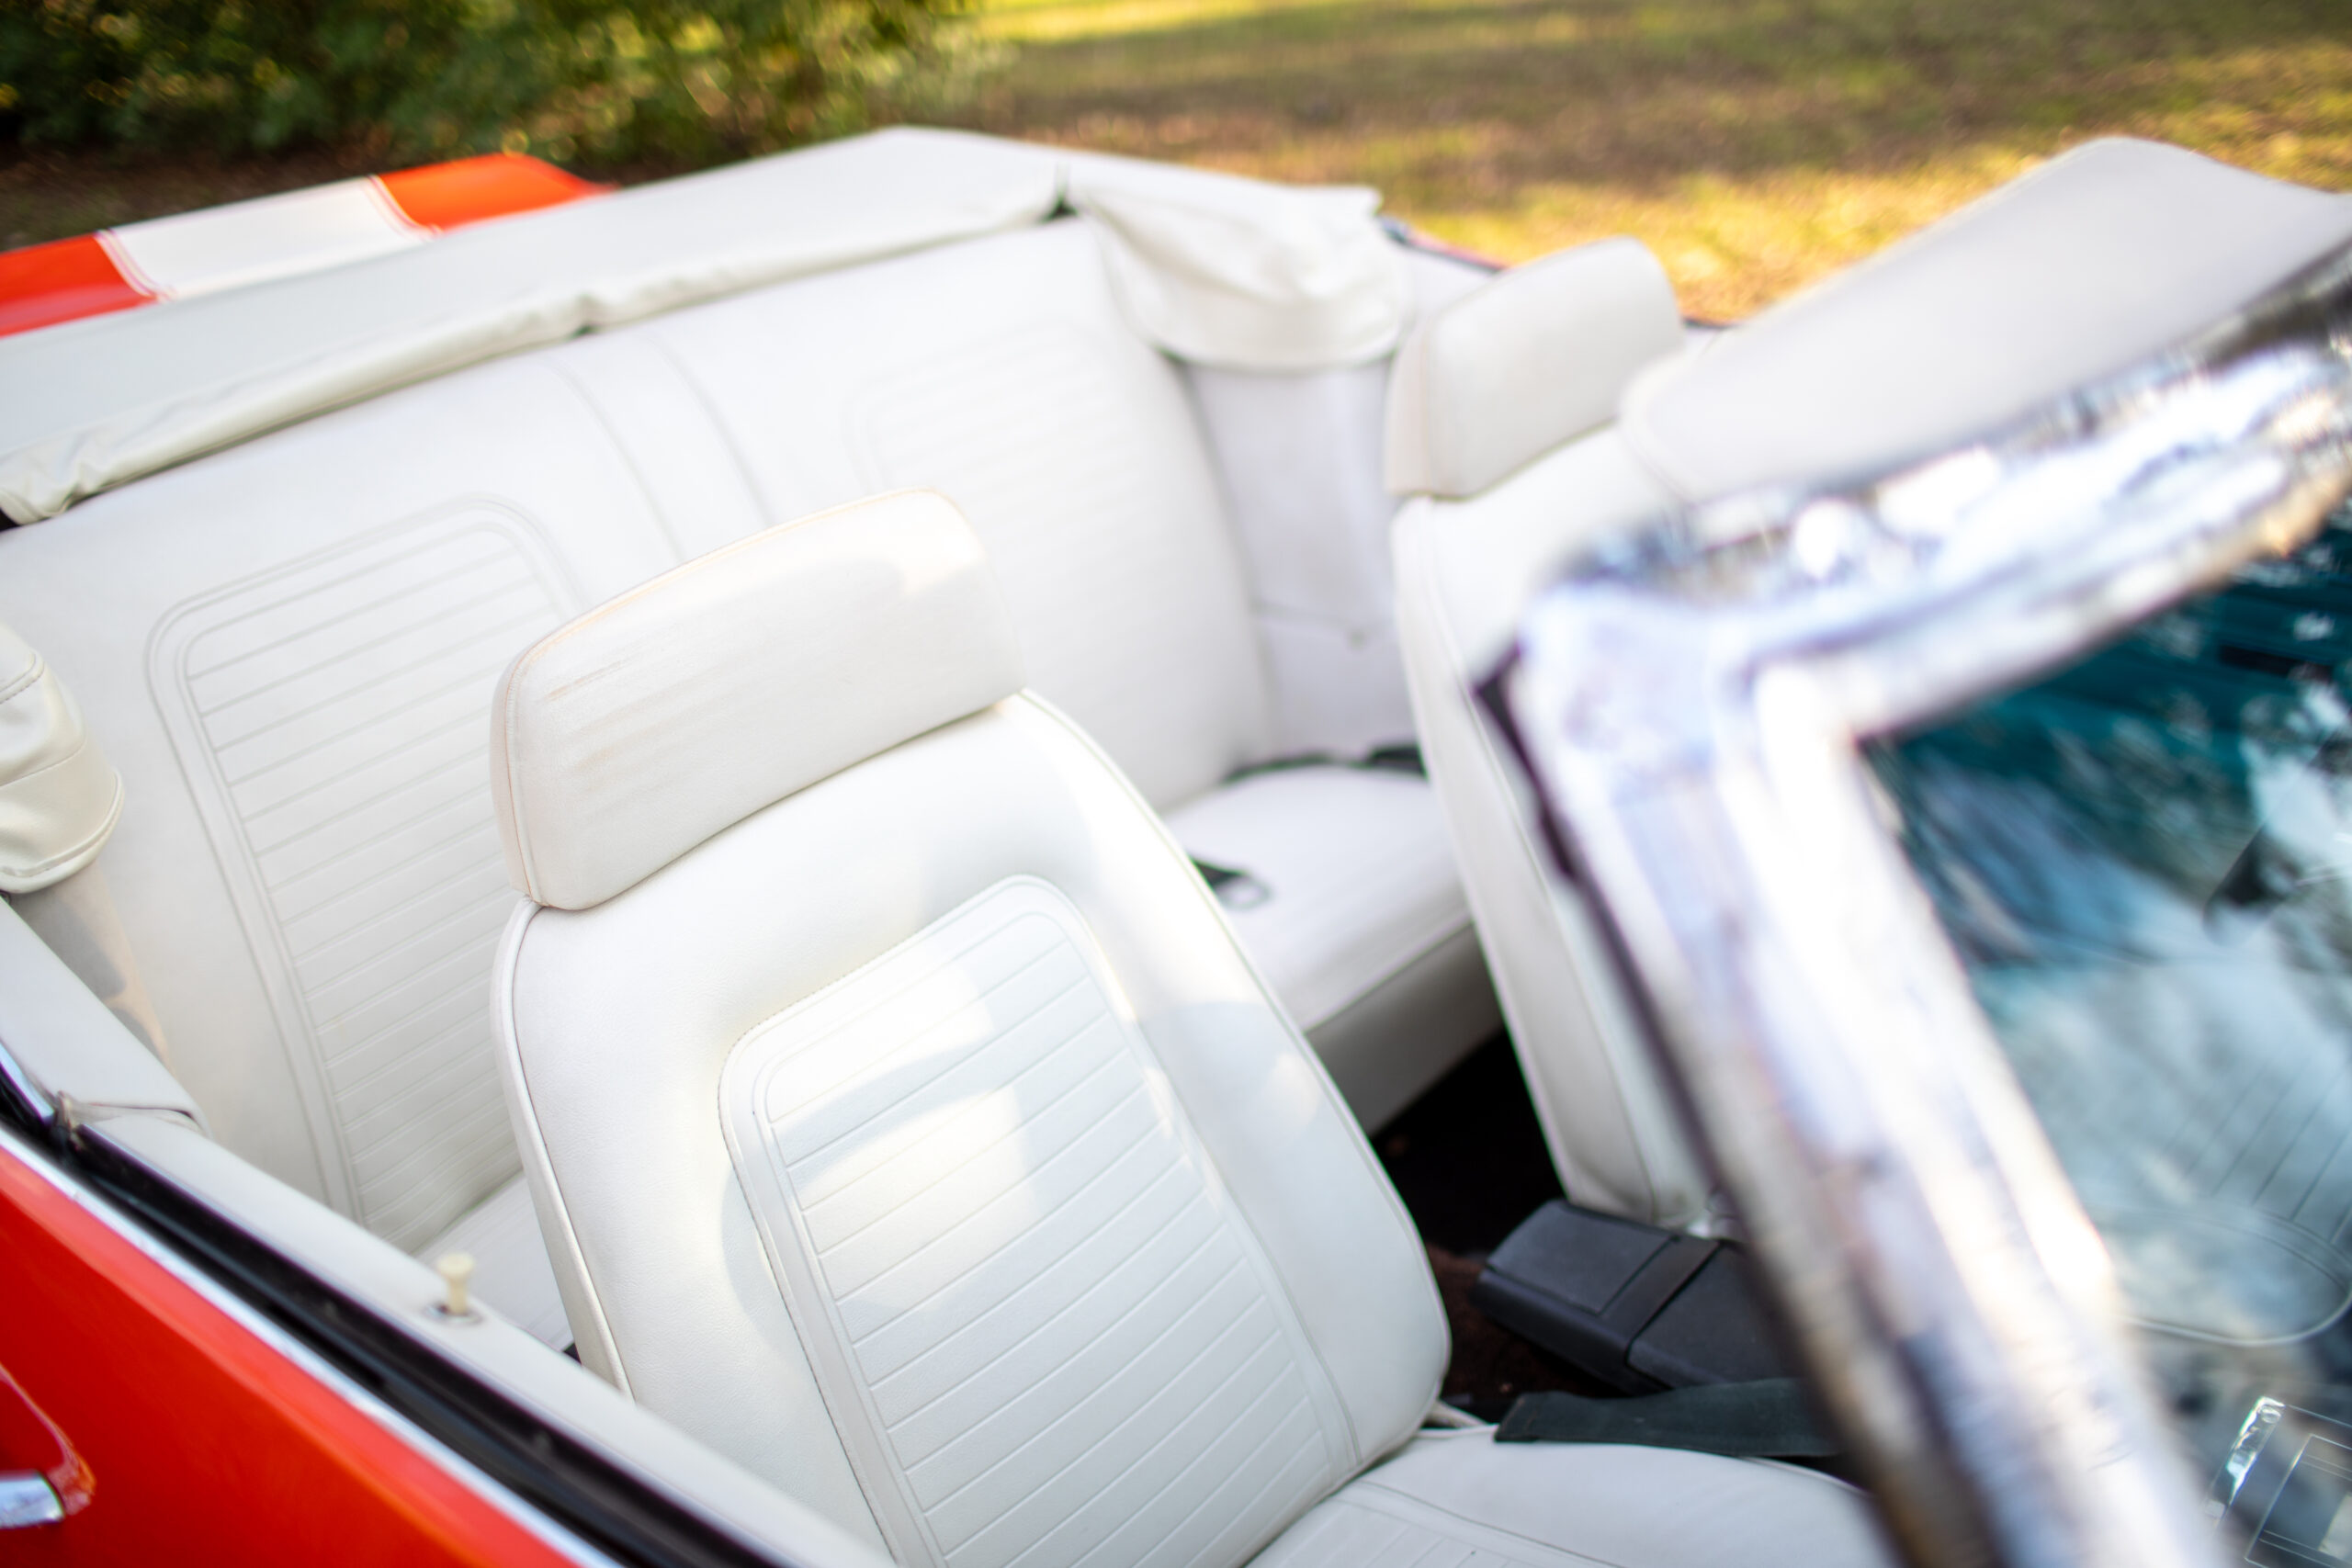 Close-up of the white leather interior of a red convertible car with the top down. The front seats are visible, with one headrest slightly tilted forward. Trees and grass are in the background.